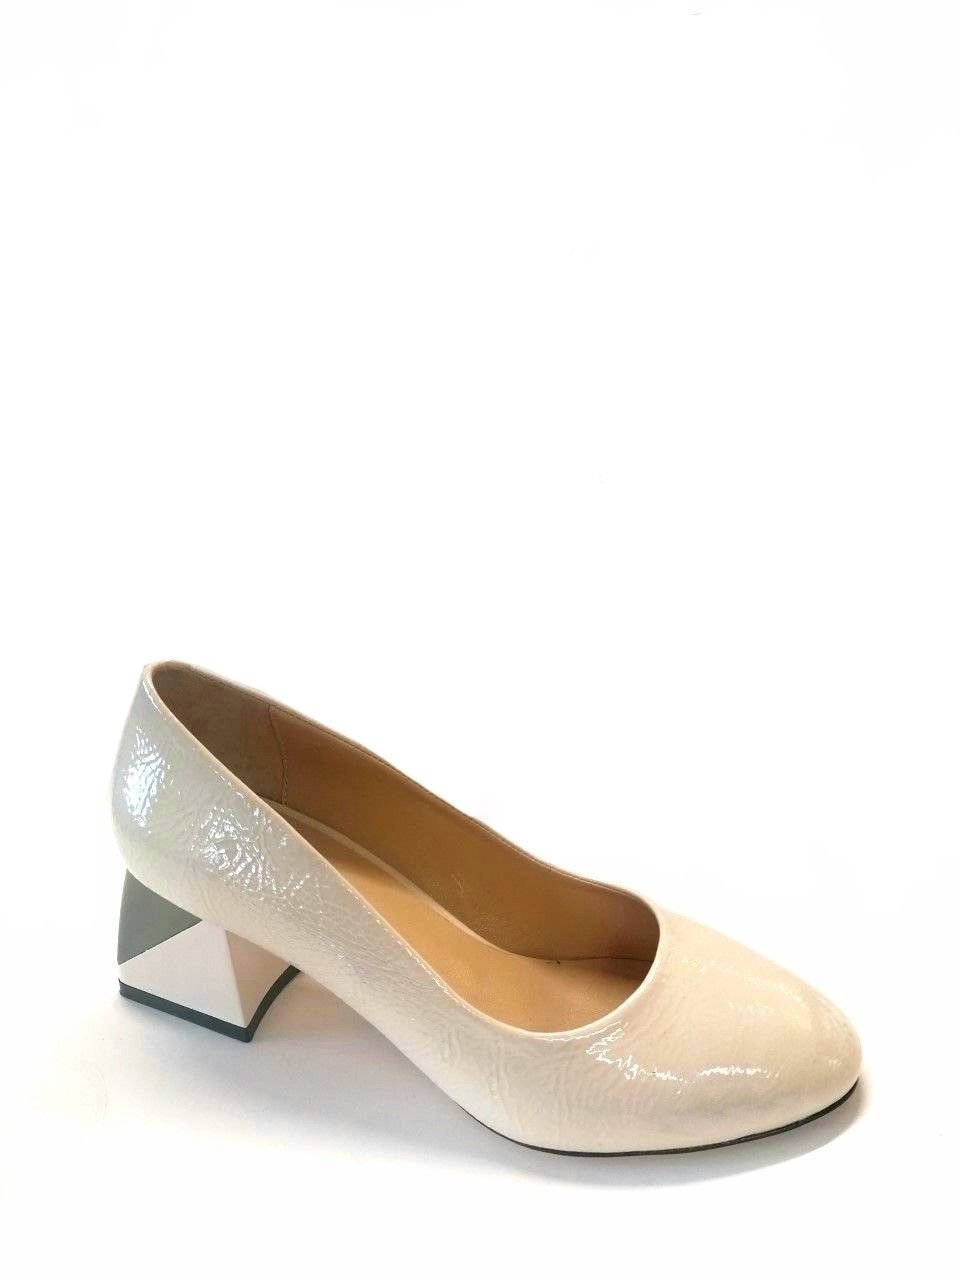 beige patent shoes with imported heel